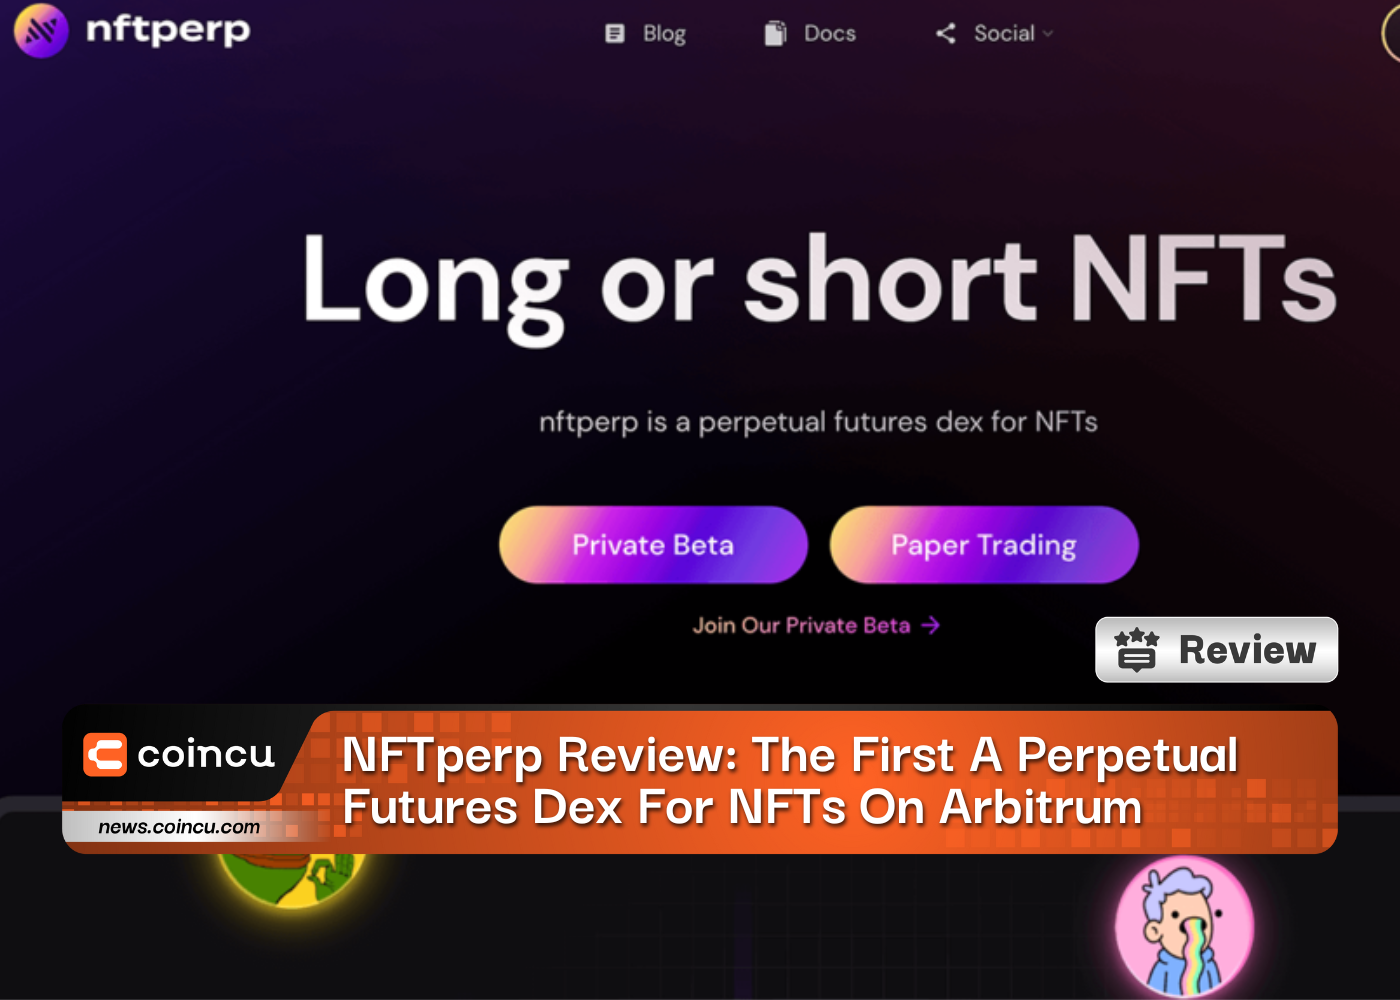 NFTperp Review: The First A Perpetual Futures Dex For NFTs On Arbitrum